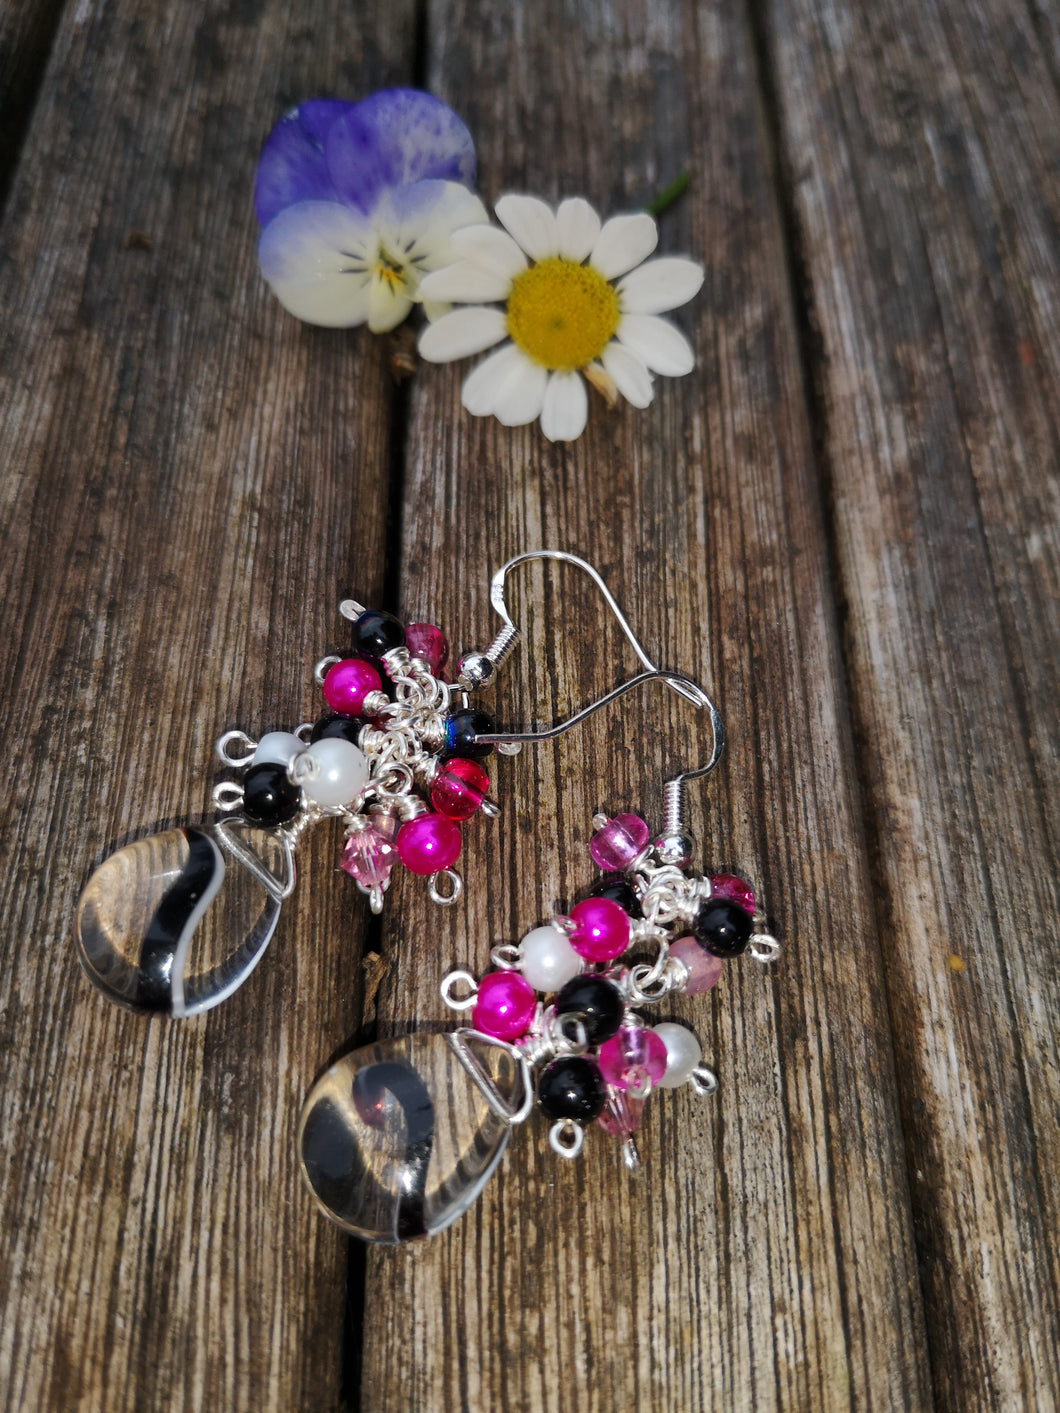 Hot pink cascade earrings with 925 silver earwires and clear swirled pear drops.